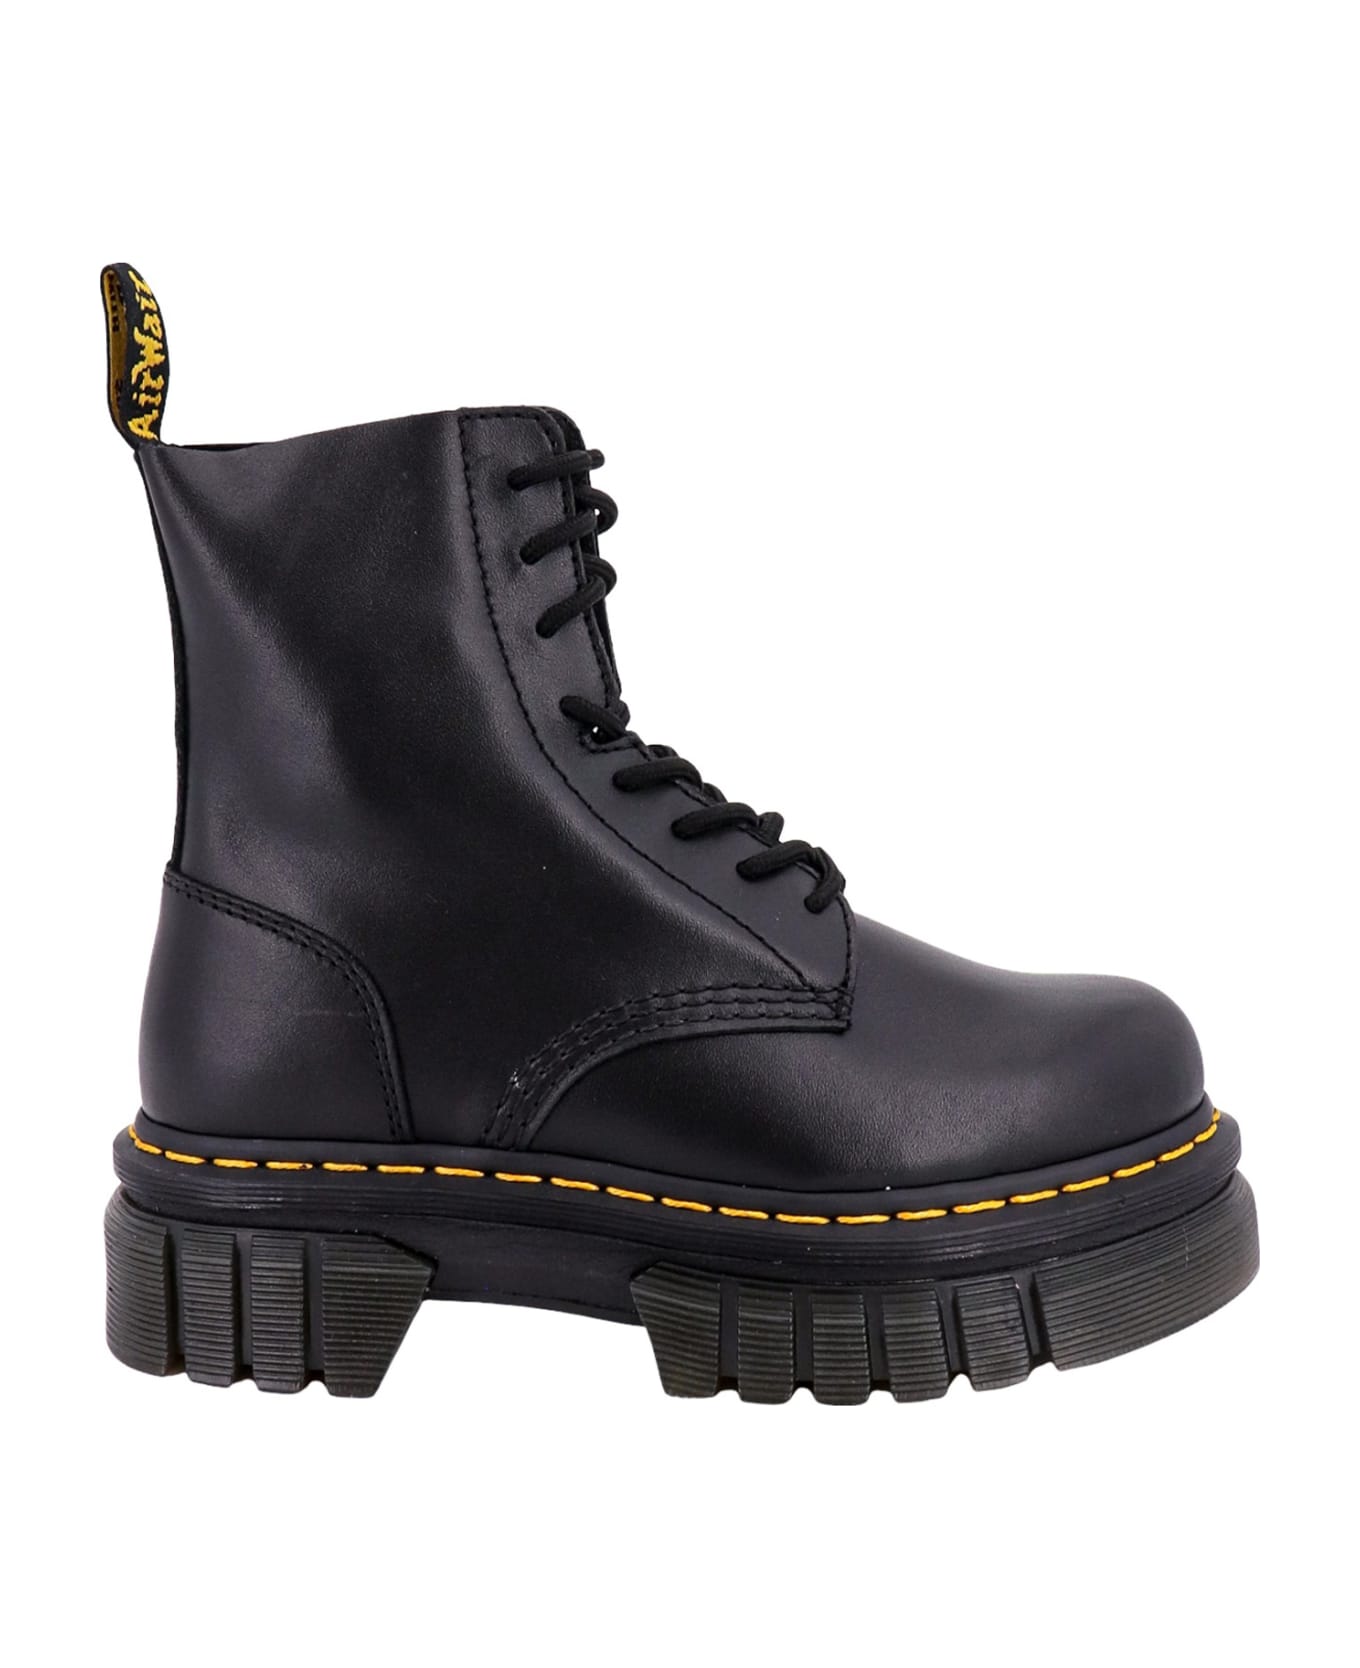 Dr. Martens Audrick 8-eye Boot Ankle Boots - black ブーツ